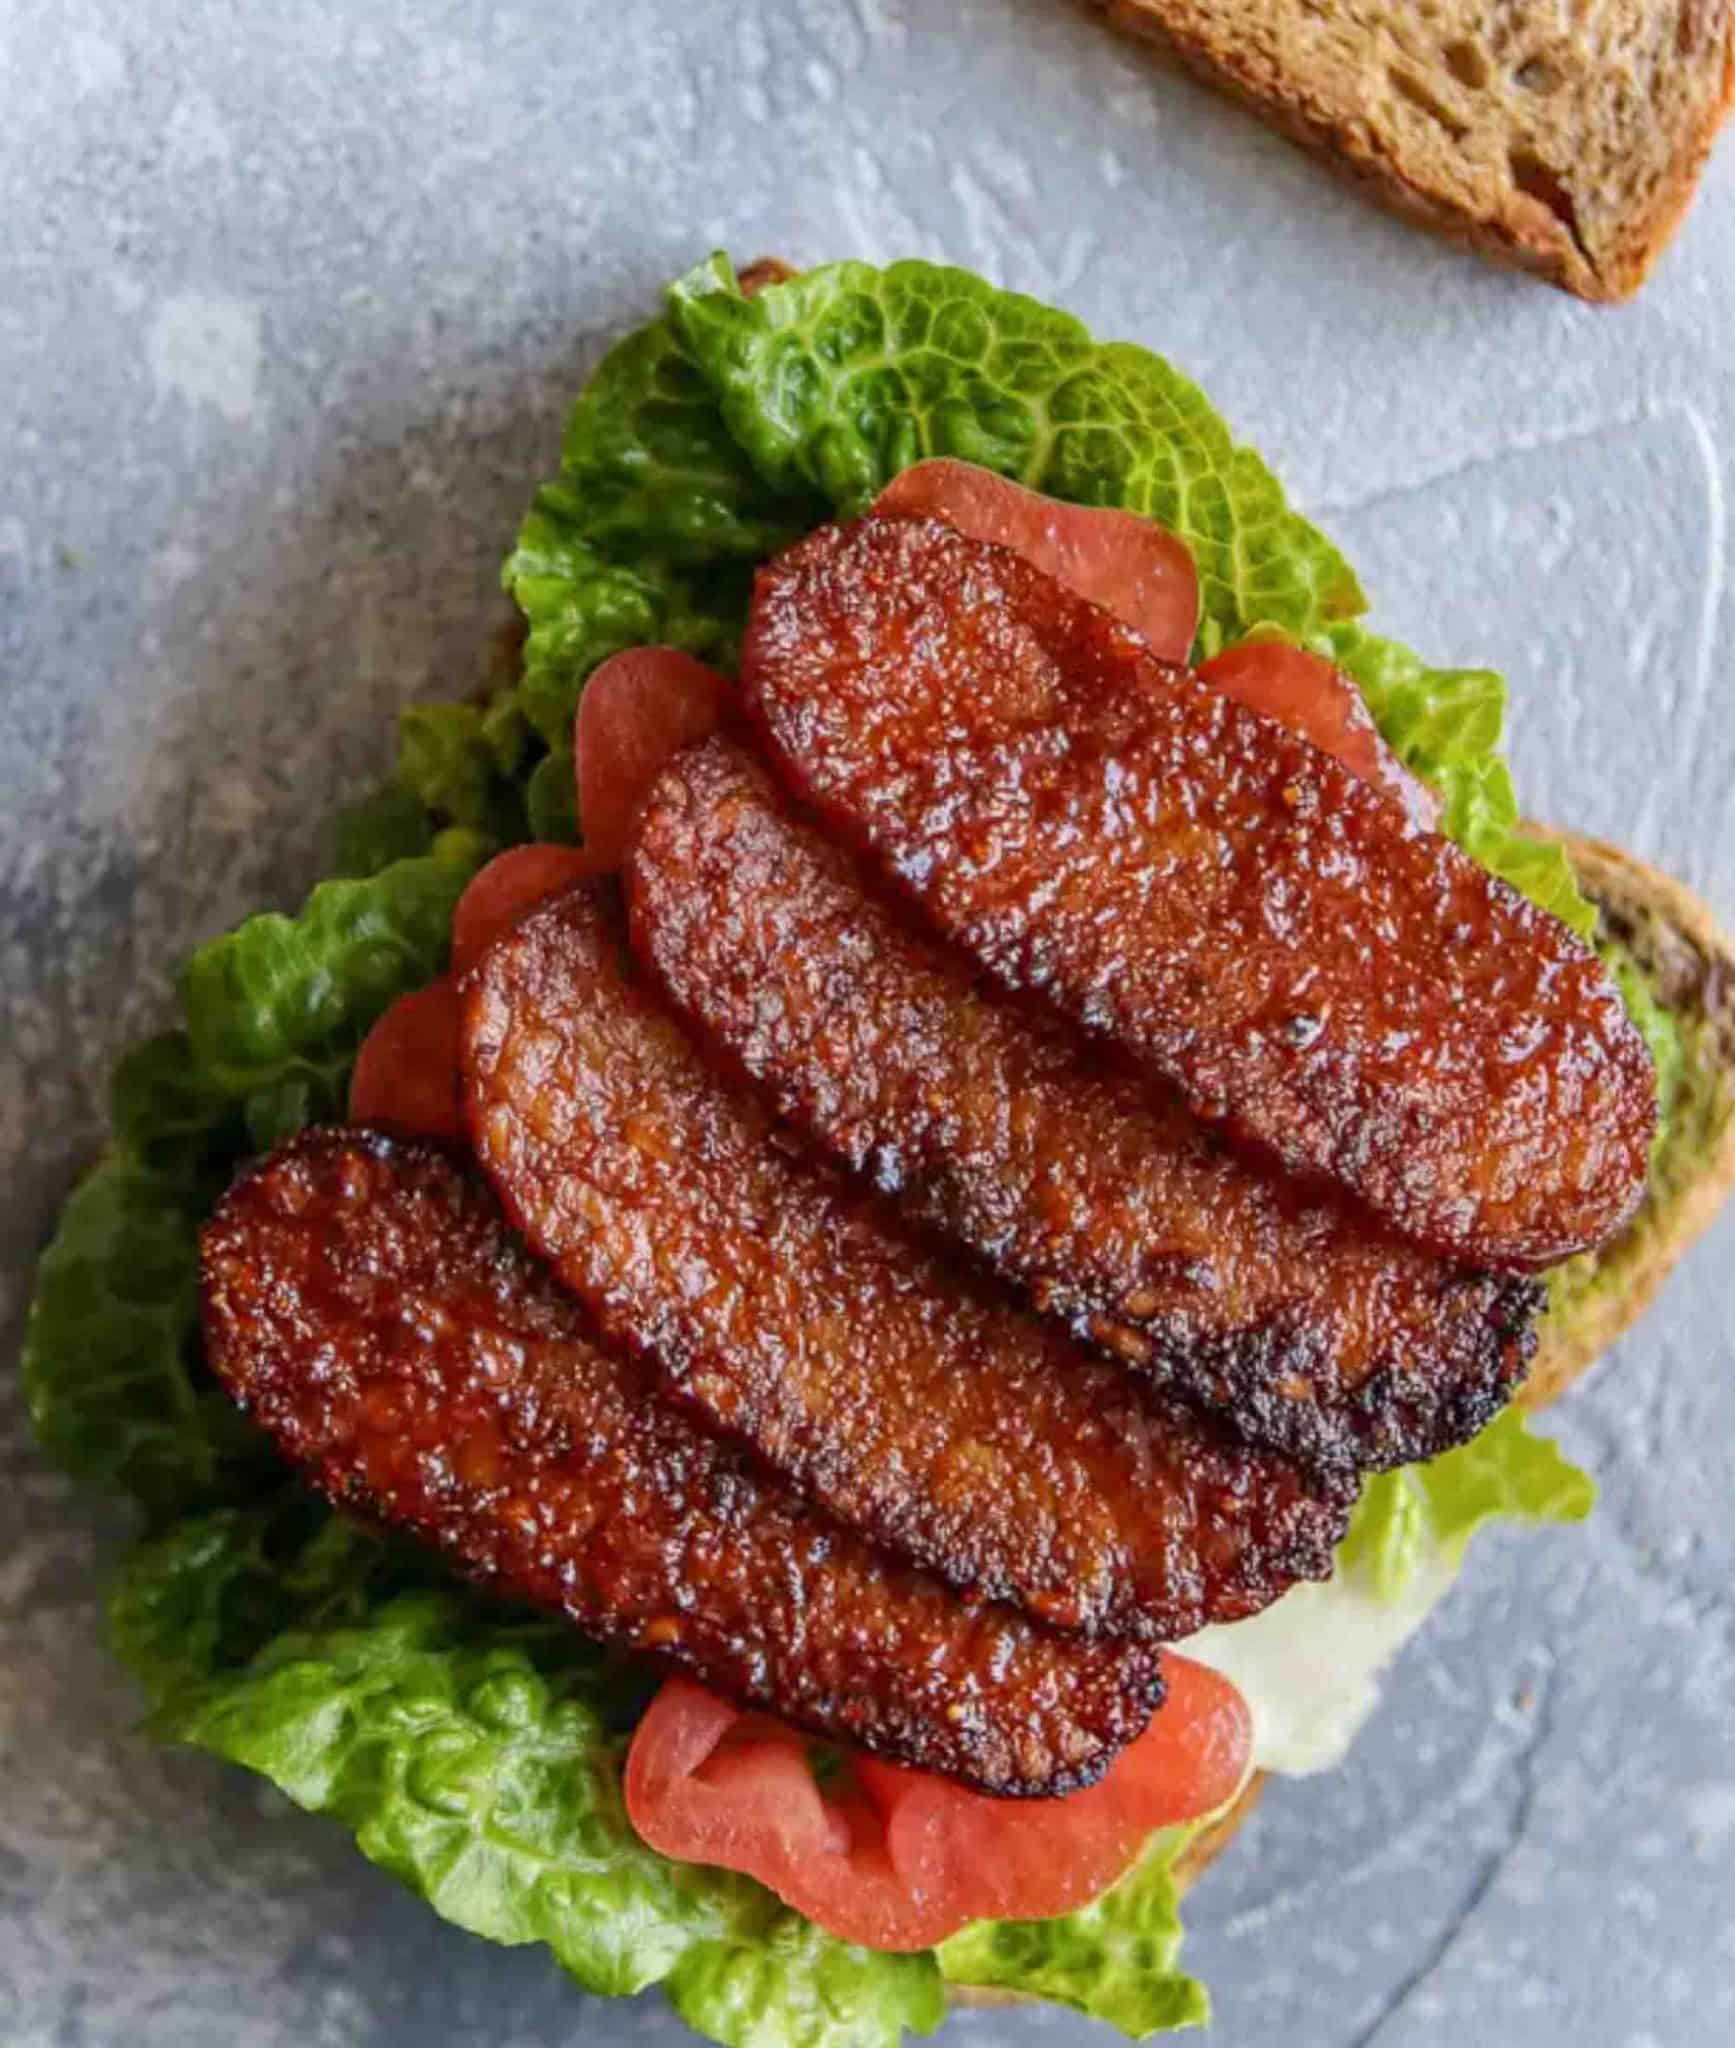 Best Vegan Tempeh Bacon Recipe for Sandwiches and Wraps and Brunch